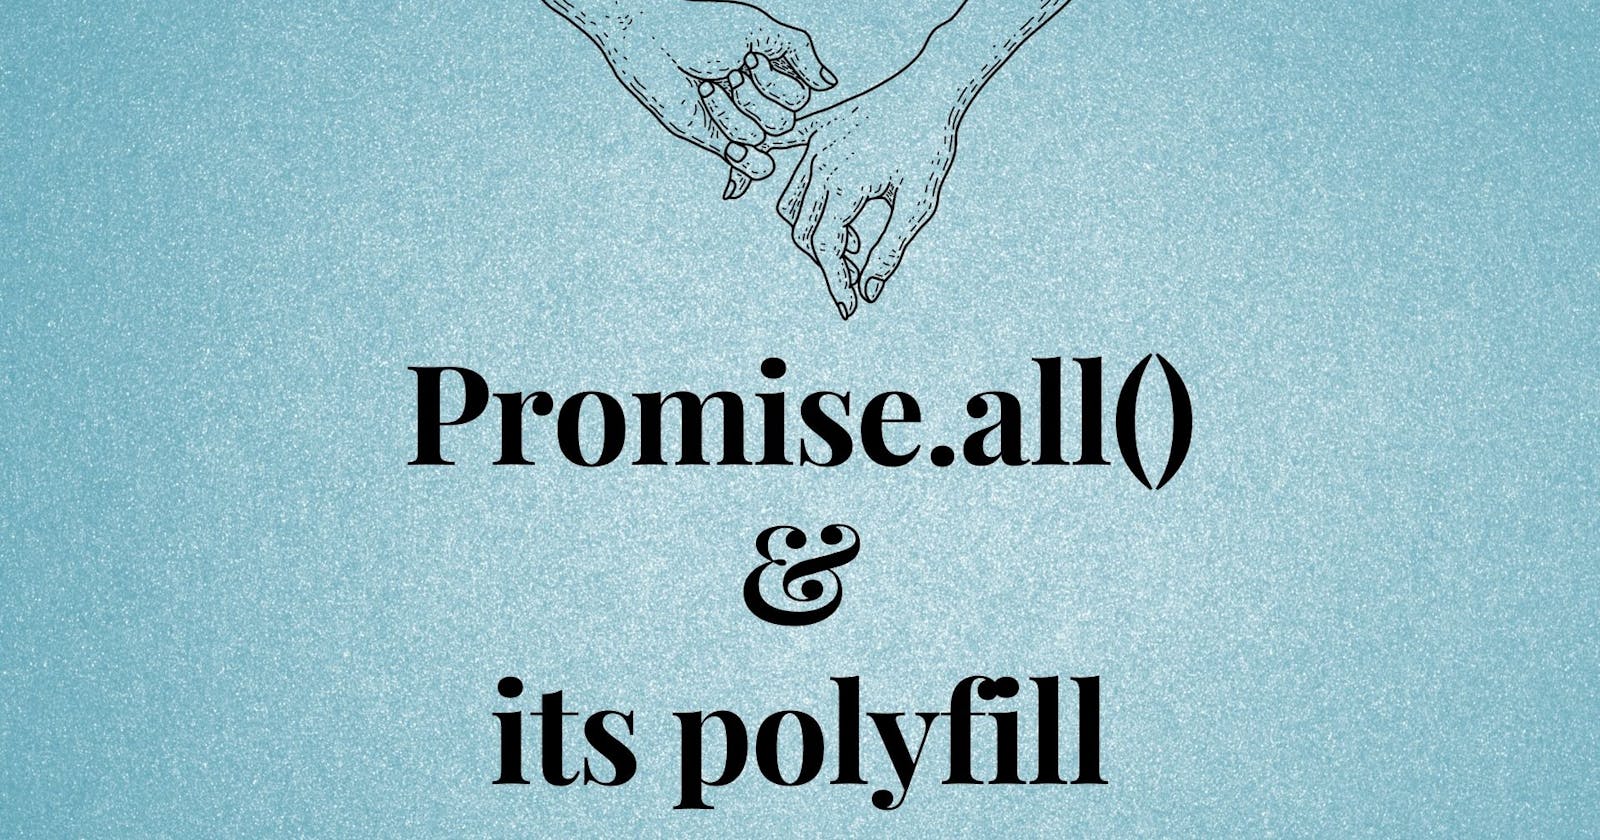 Promise.all() and its polyfill